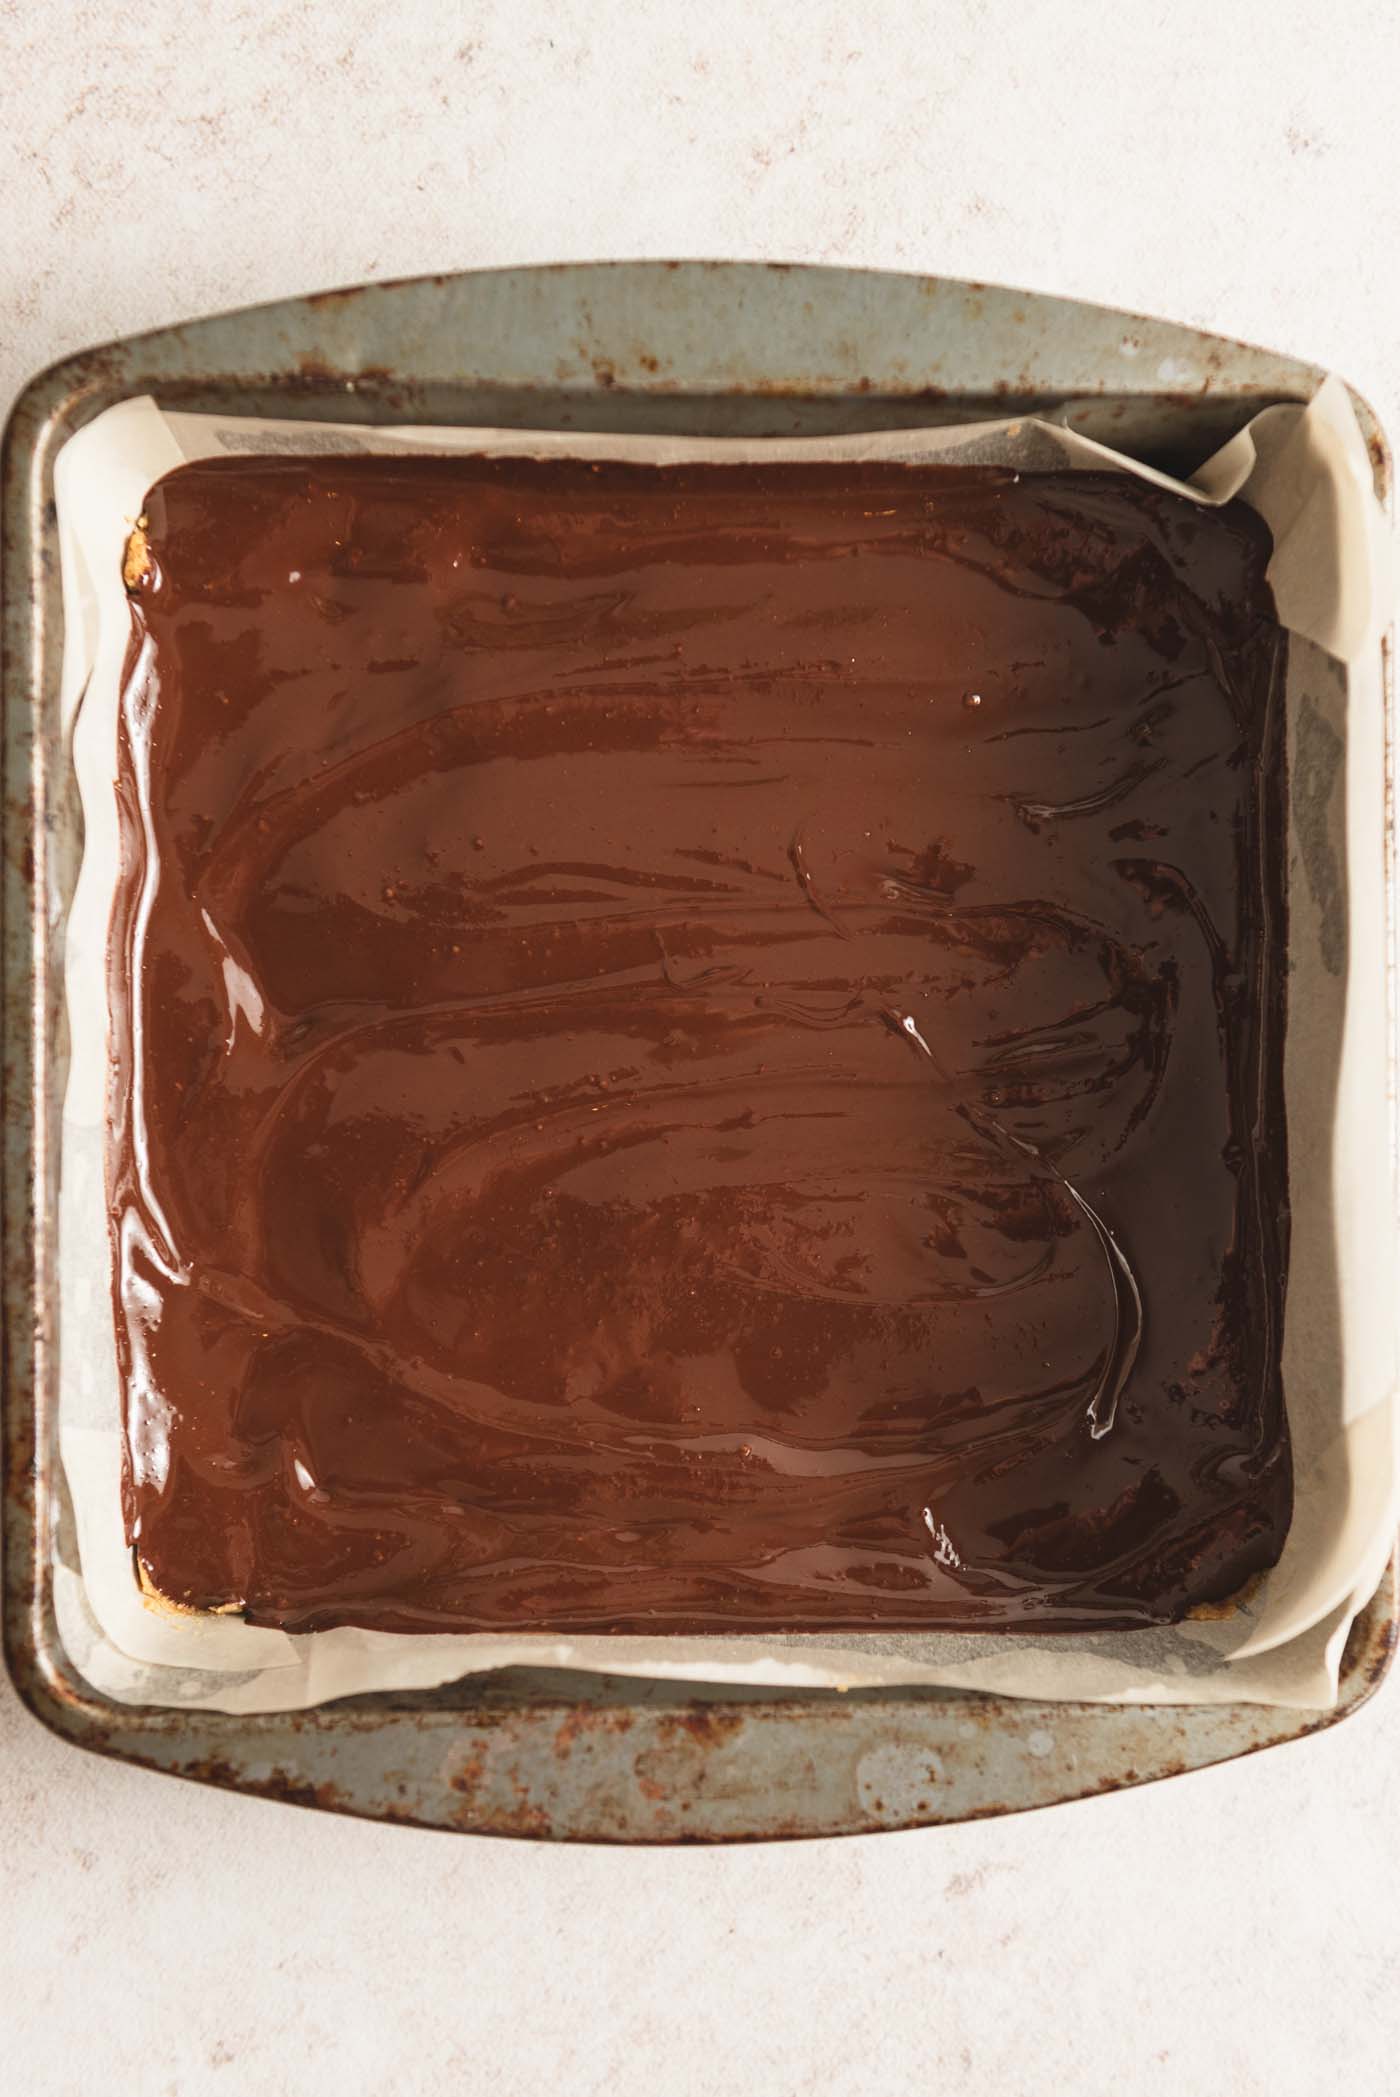 Overhead view of a pan of chocolate peanut butter bars. The chocolate layer on top is still melted and not yet firmed in the fridge.